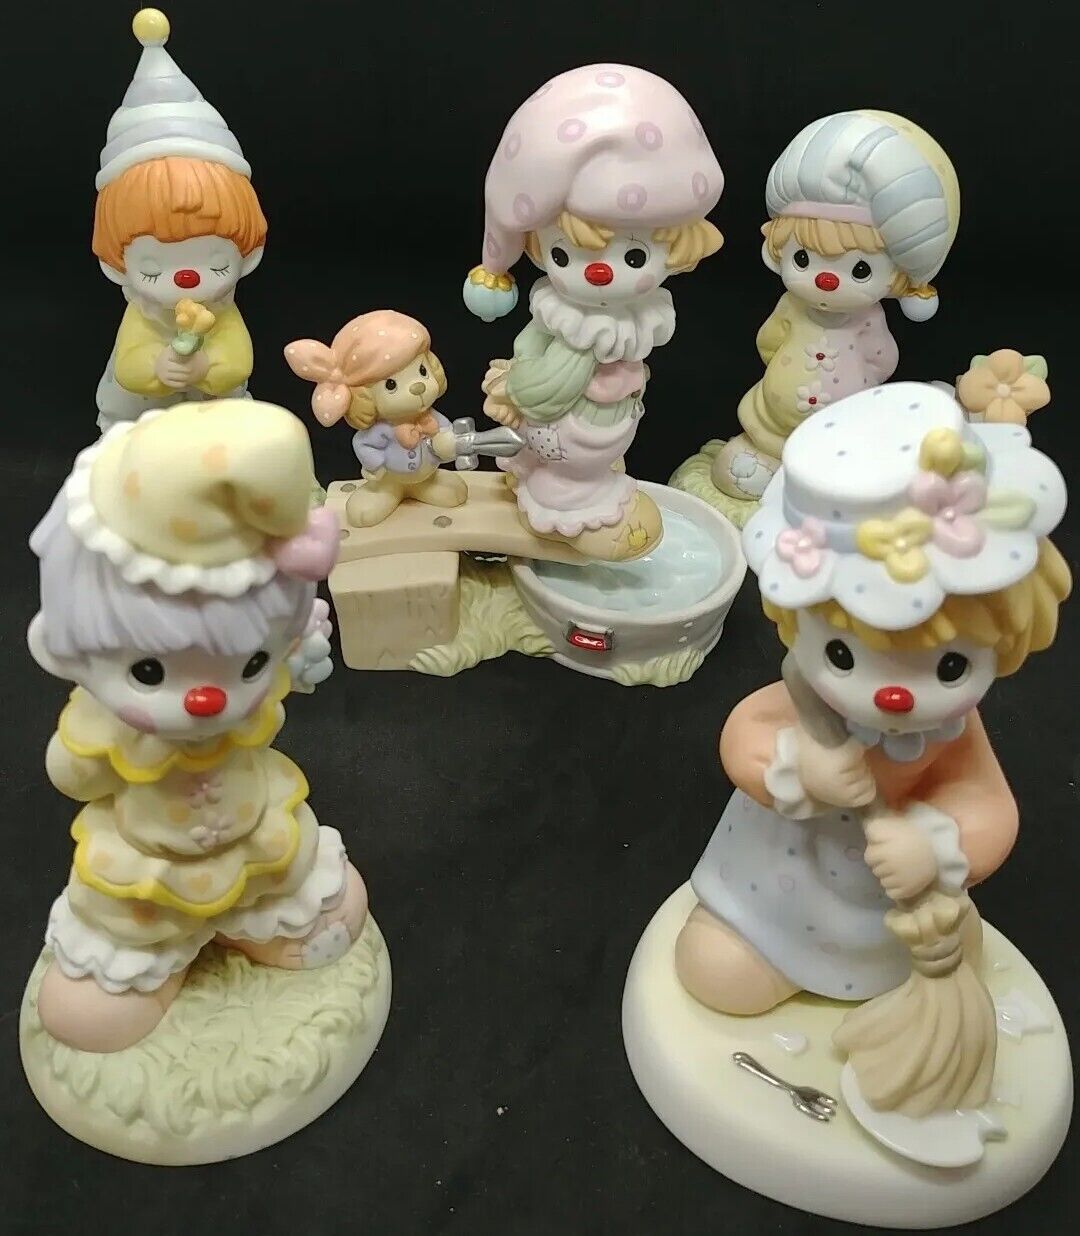 Rare Limited Precious Moments 5 PIECE SET/SERIES Red Nose Clown Figurines (SS)